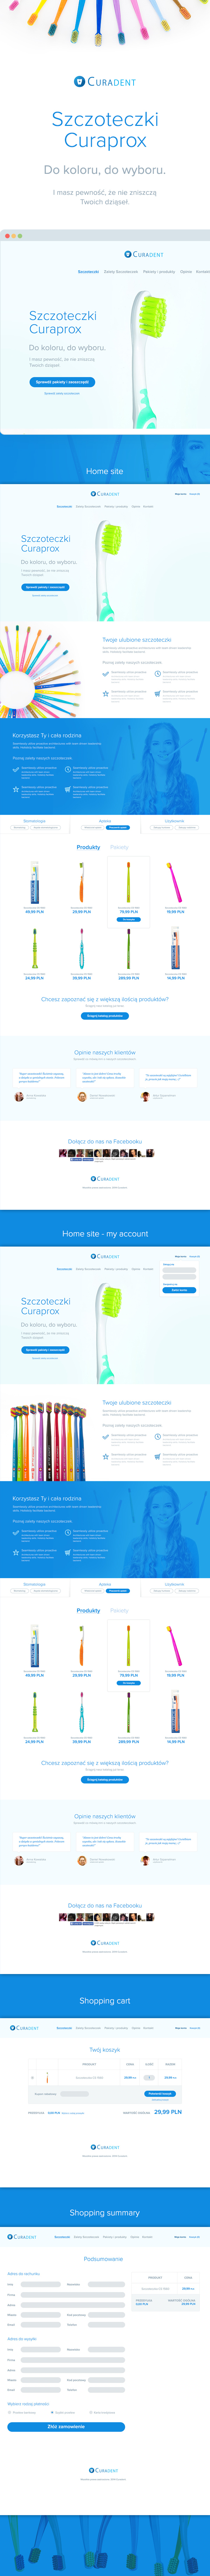 curadent teeth brush Curaprox Layout Webdesign landing page Ecommerce shop Michal michanczyk enlive